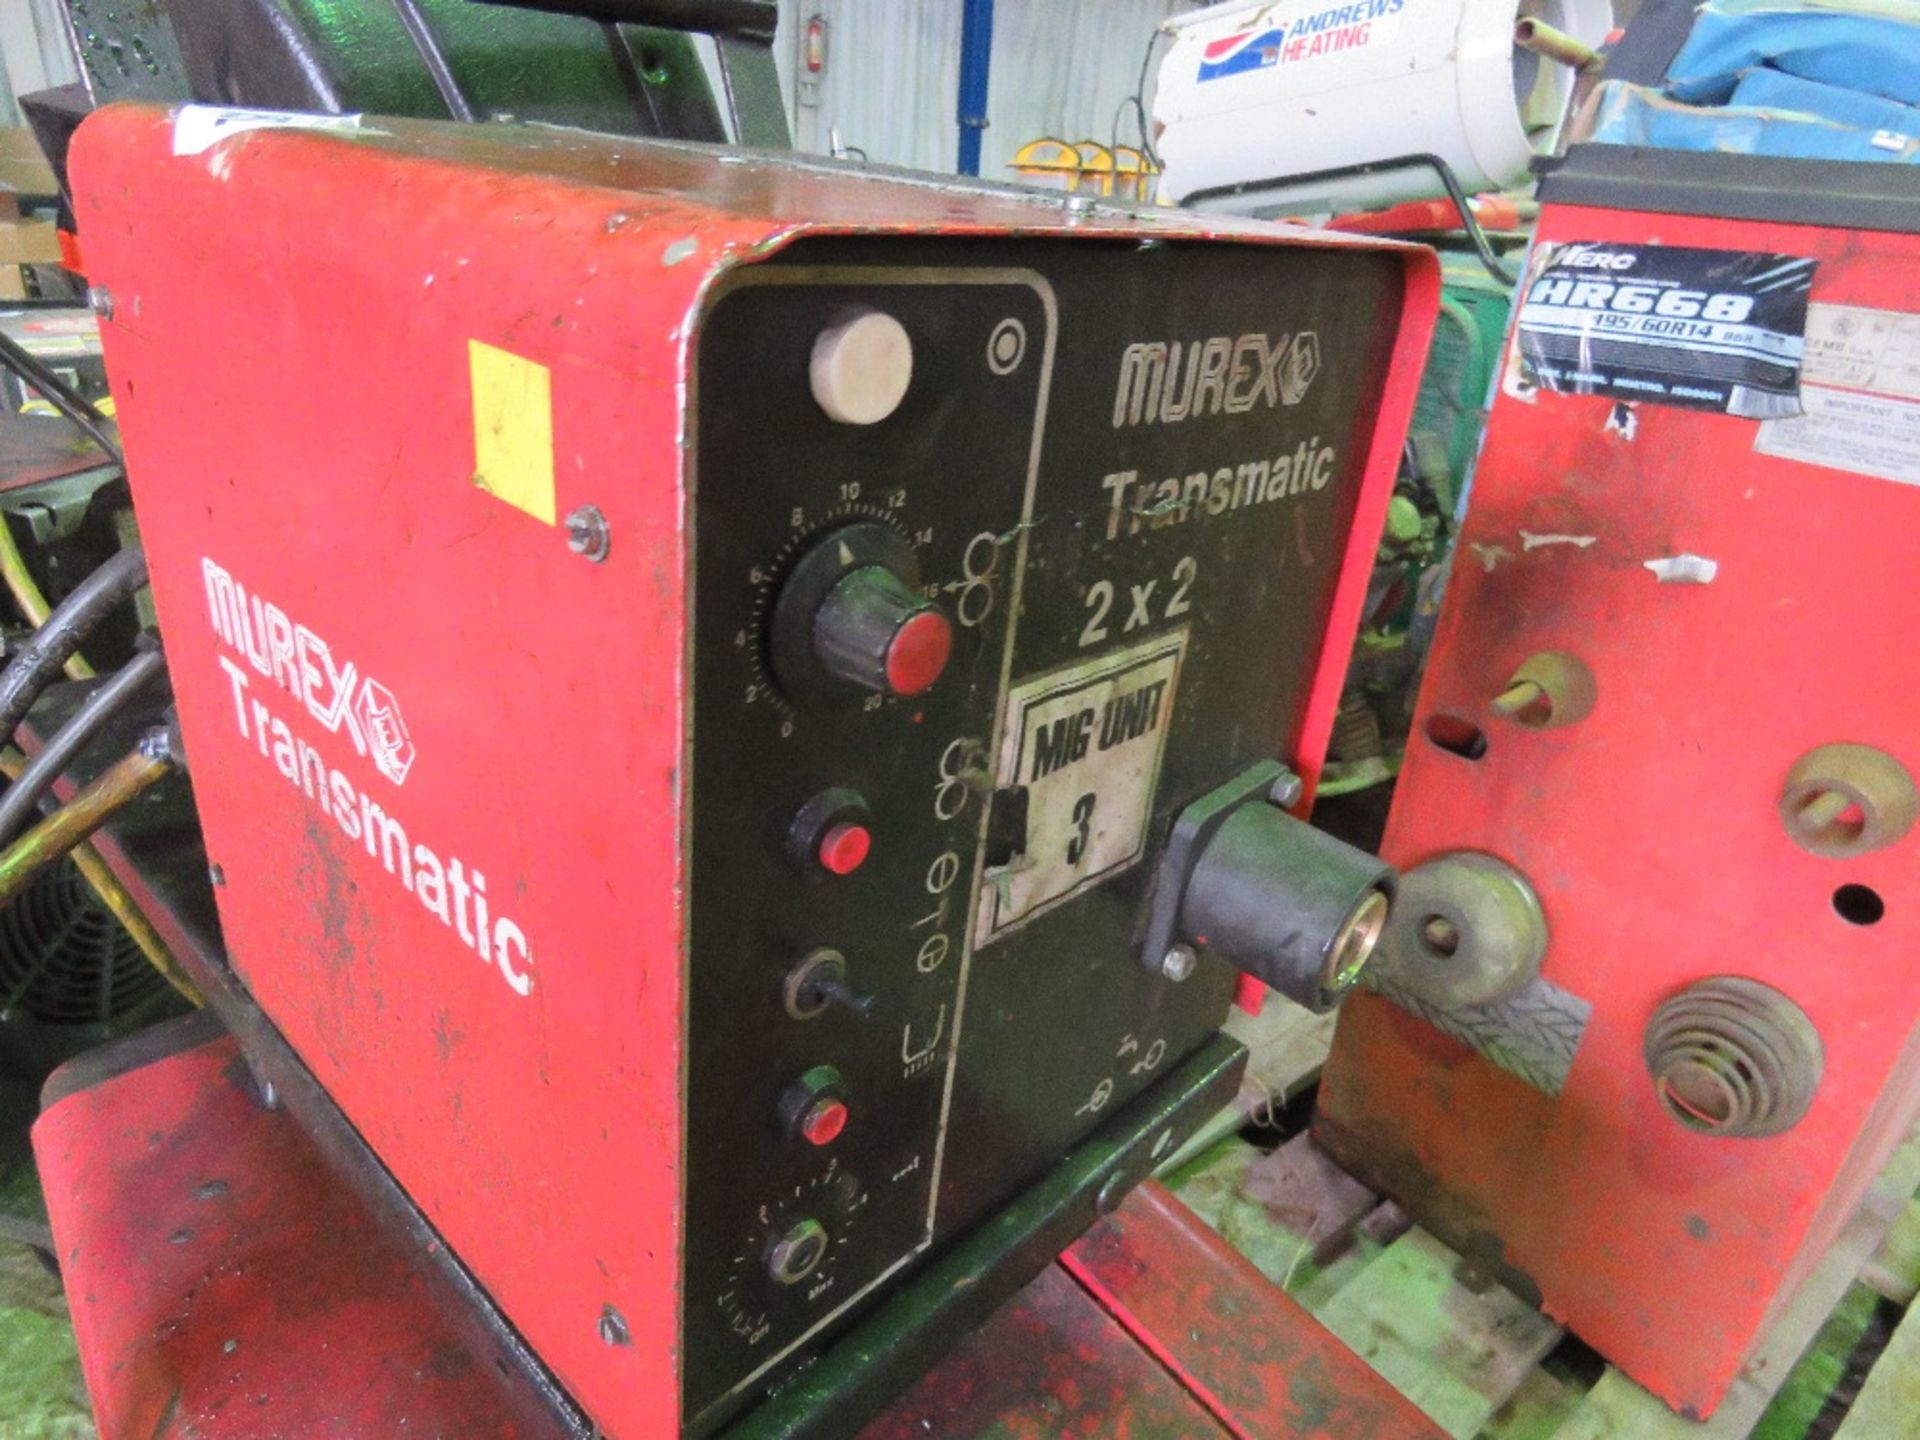 MUREX TRANSMIG 253 WELDER, 3 PHASE POWERED SOURCED FROM COMPANY LIQUIDATION. THIS LOT IS SOLD UND - Image 3 of 6